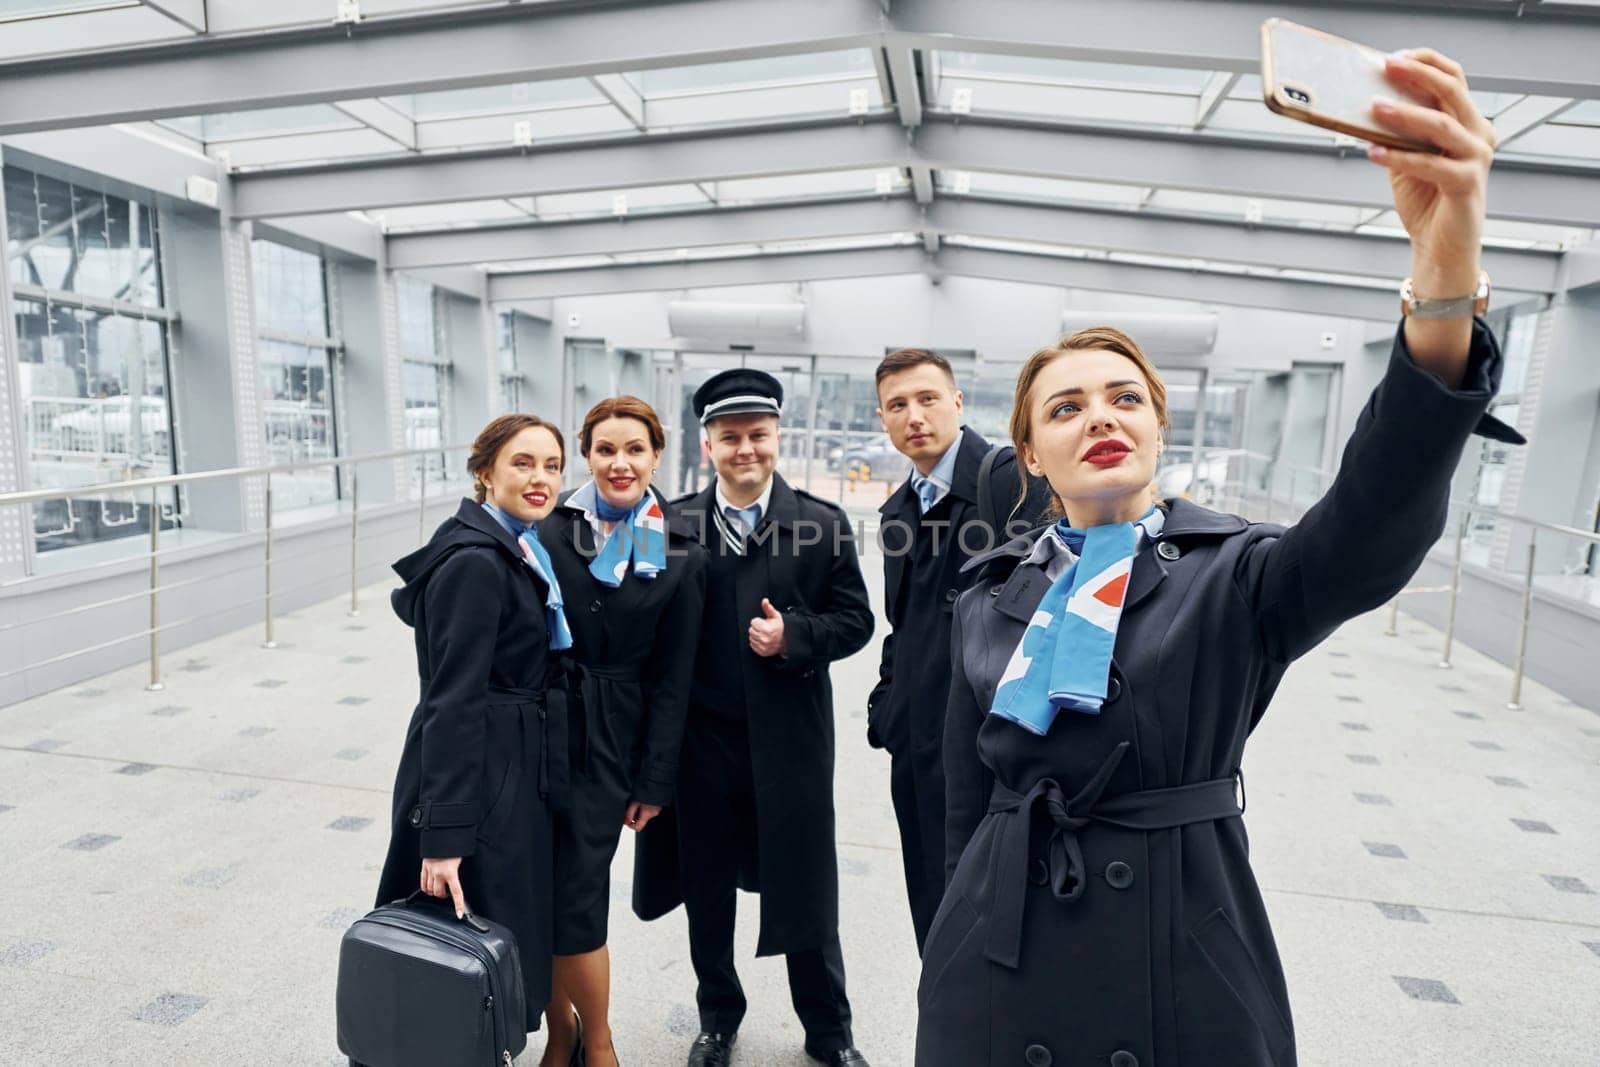 Doing selfie. Airplane crew in uniform is going to the work together.